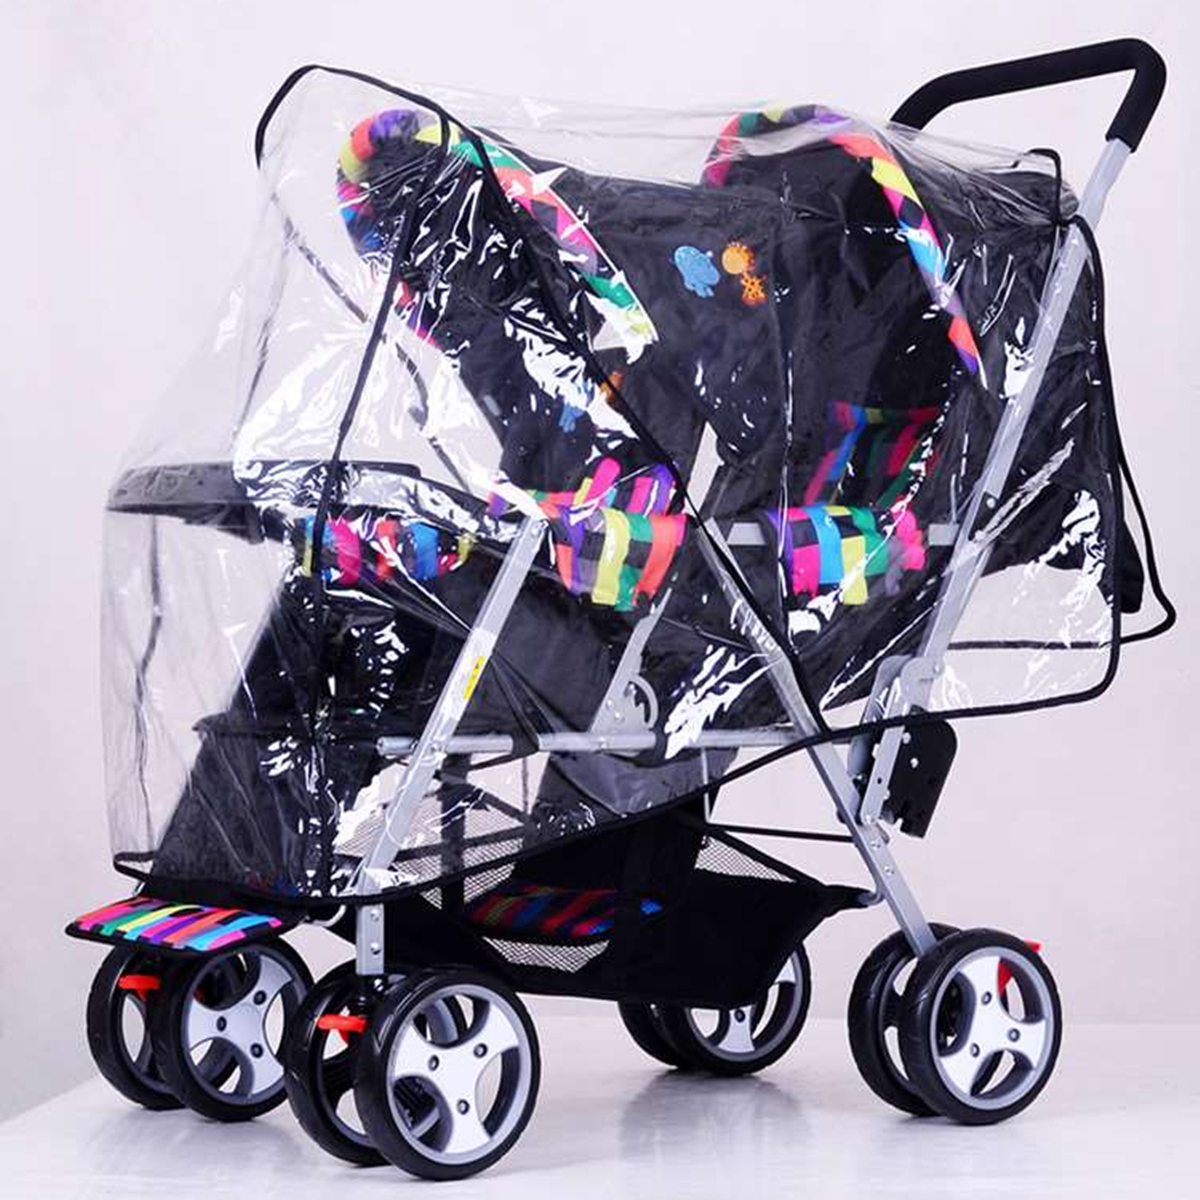 Clear-Stroller-Rain-Cover-Weather-Pram-Baby-Infant-Double-Pushchair-Wind-Shield-Raincoat-1294265